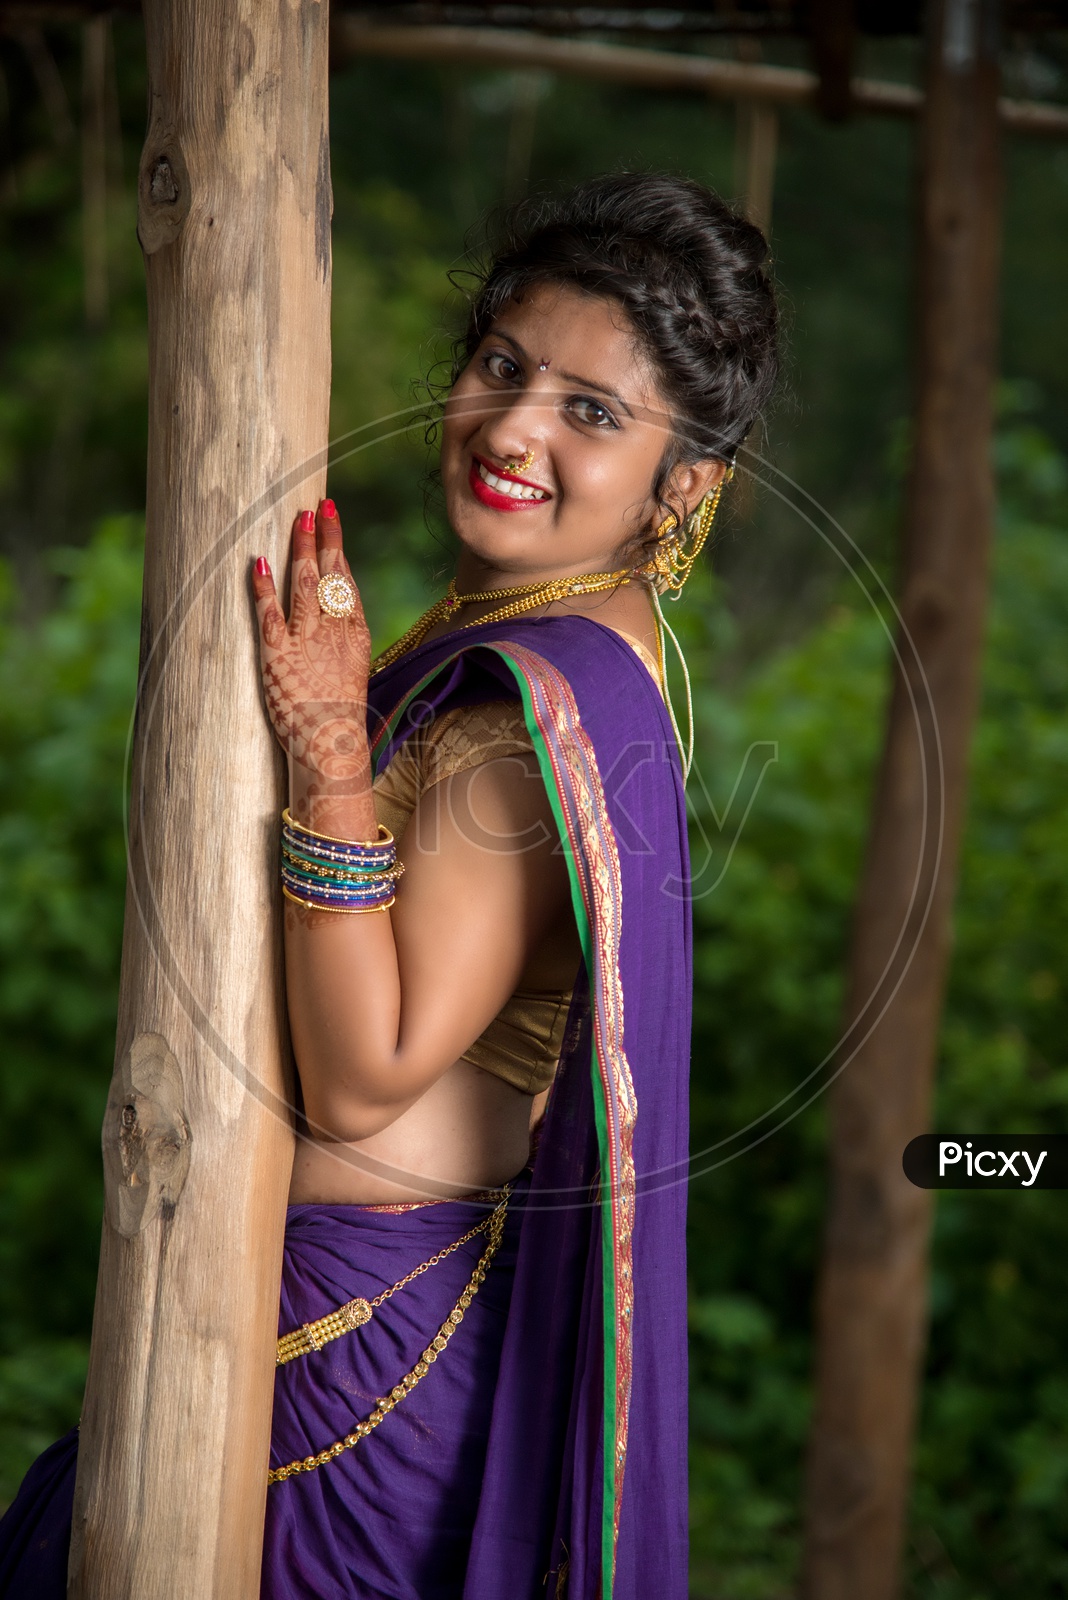 A Young Woman Posing in Her Traditional Saree Dress · Free Stock Photo-cacanhphuclong.com.vn